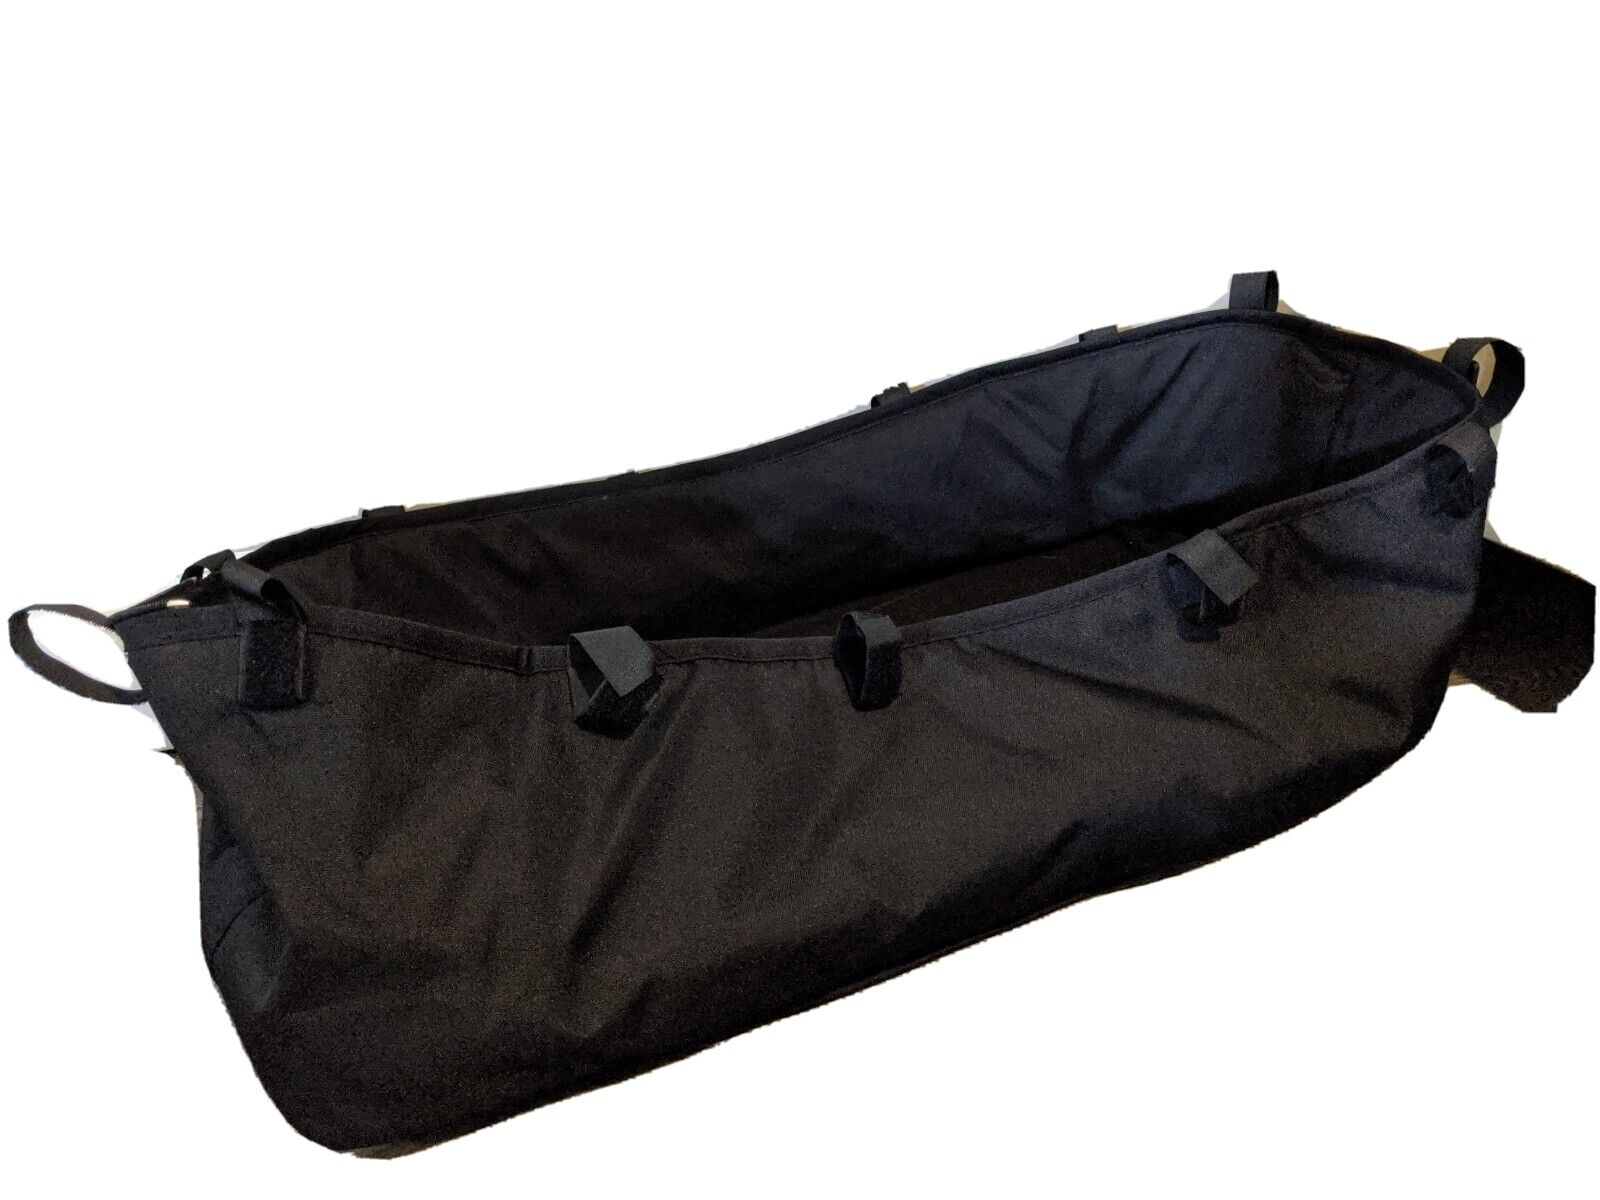 Bugaboo Donkey Bassinet Insert Carrycot Black Pre-owned Matress Wooden Board